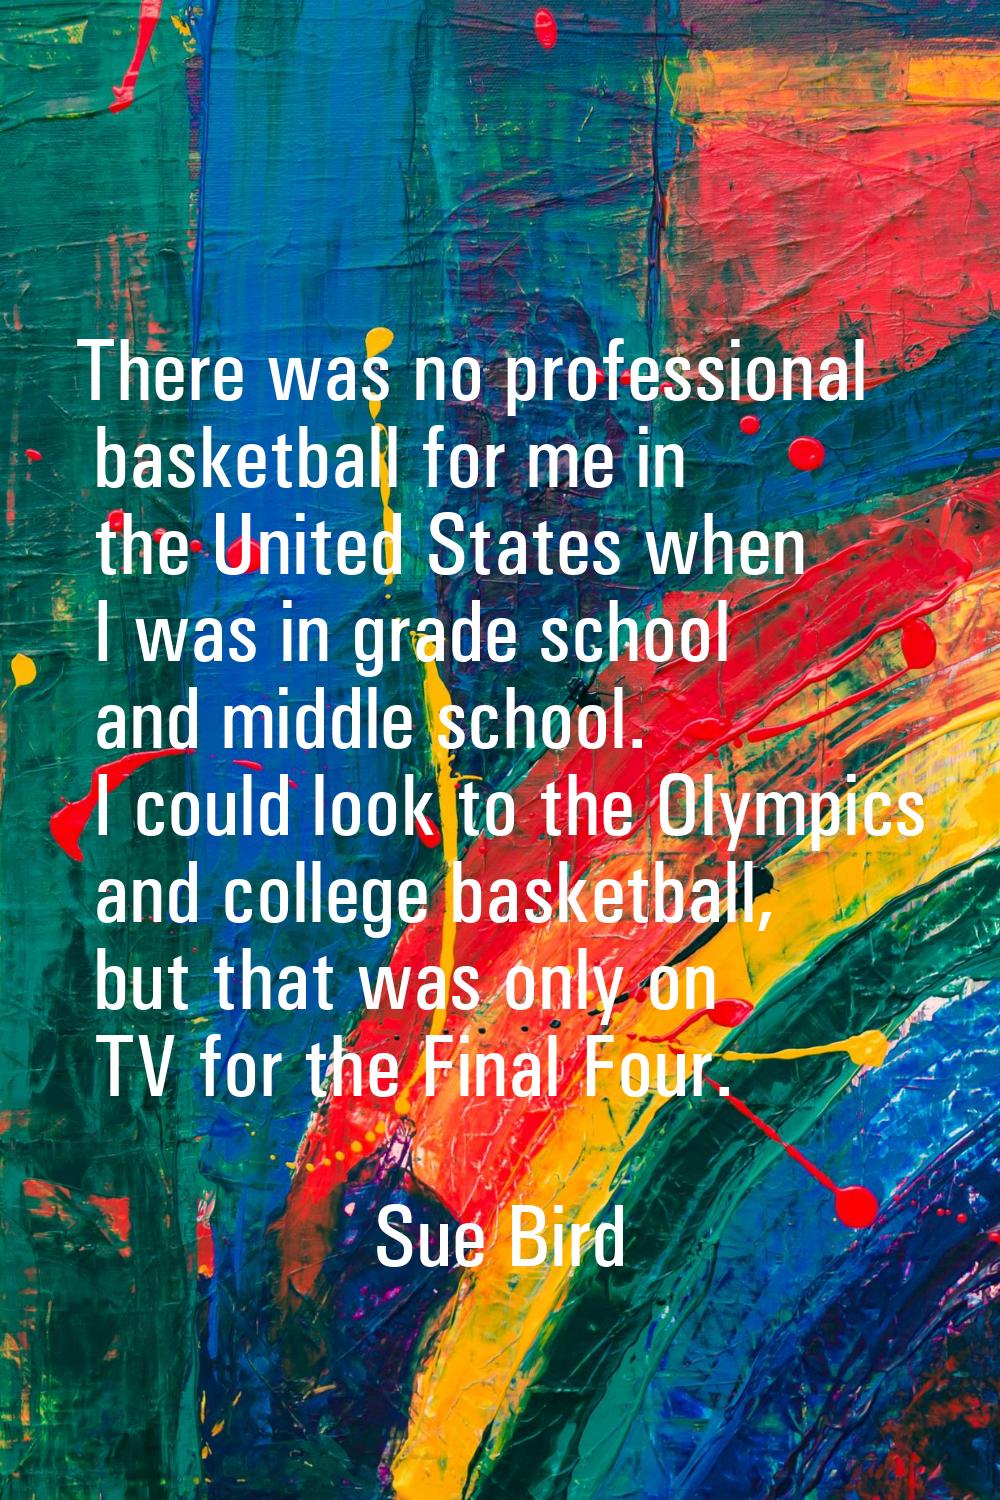 There was no professional basketball for me in the United States when I was in grade school and mid